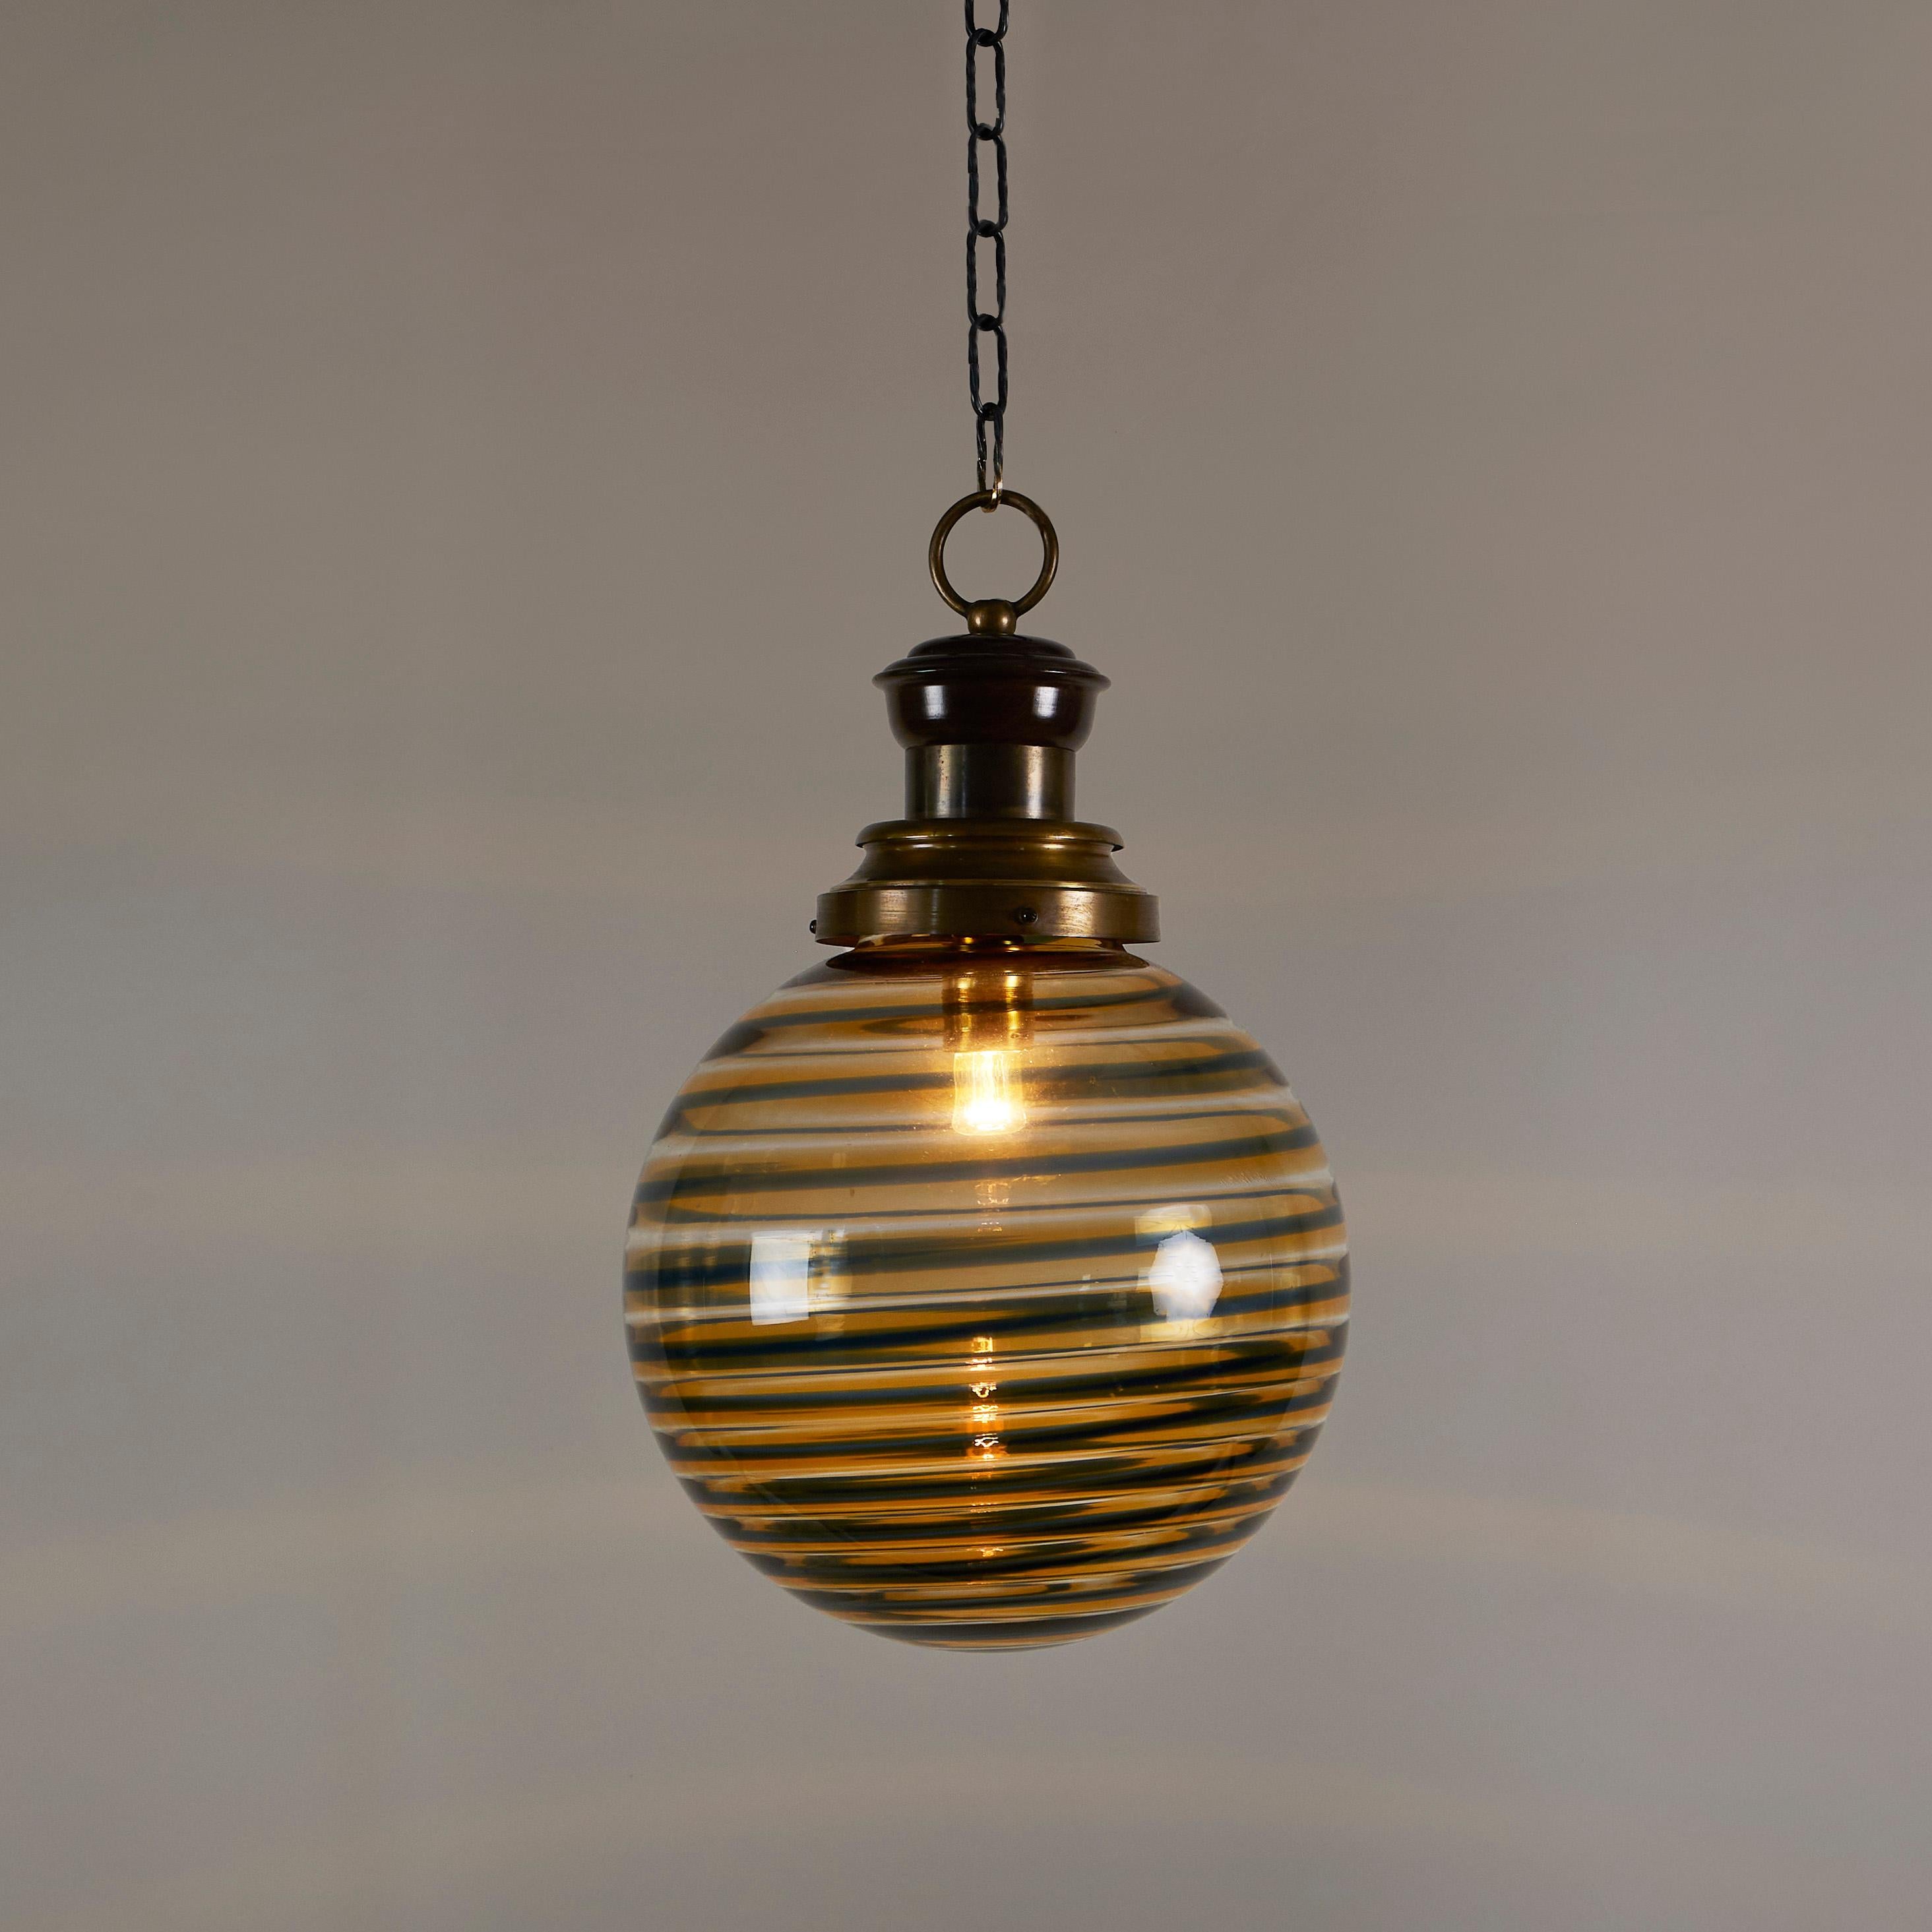 Murano handblown glass sphere pendant of pale amber glass with black swirl pattern. Brass fitting, chain and ceiling rose.
